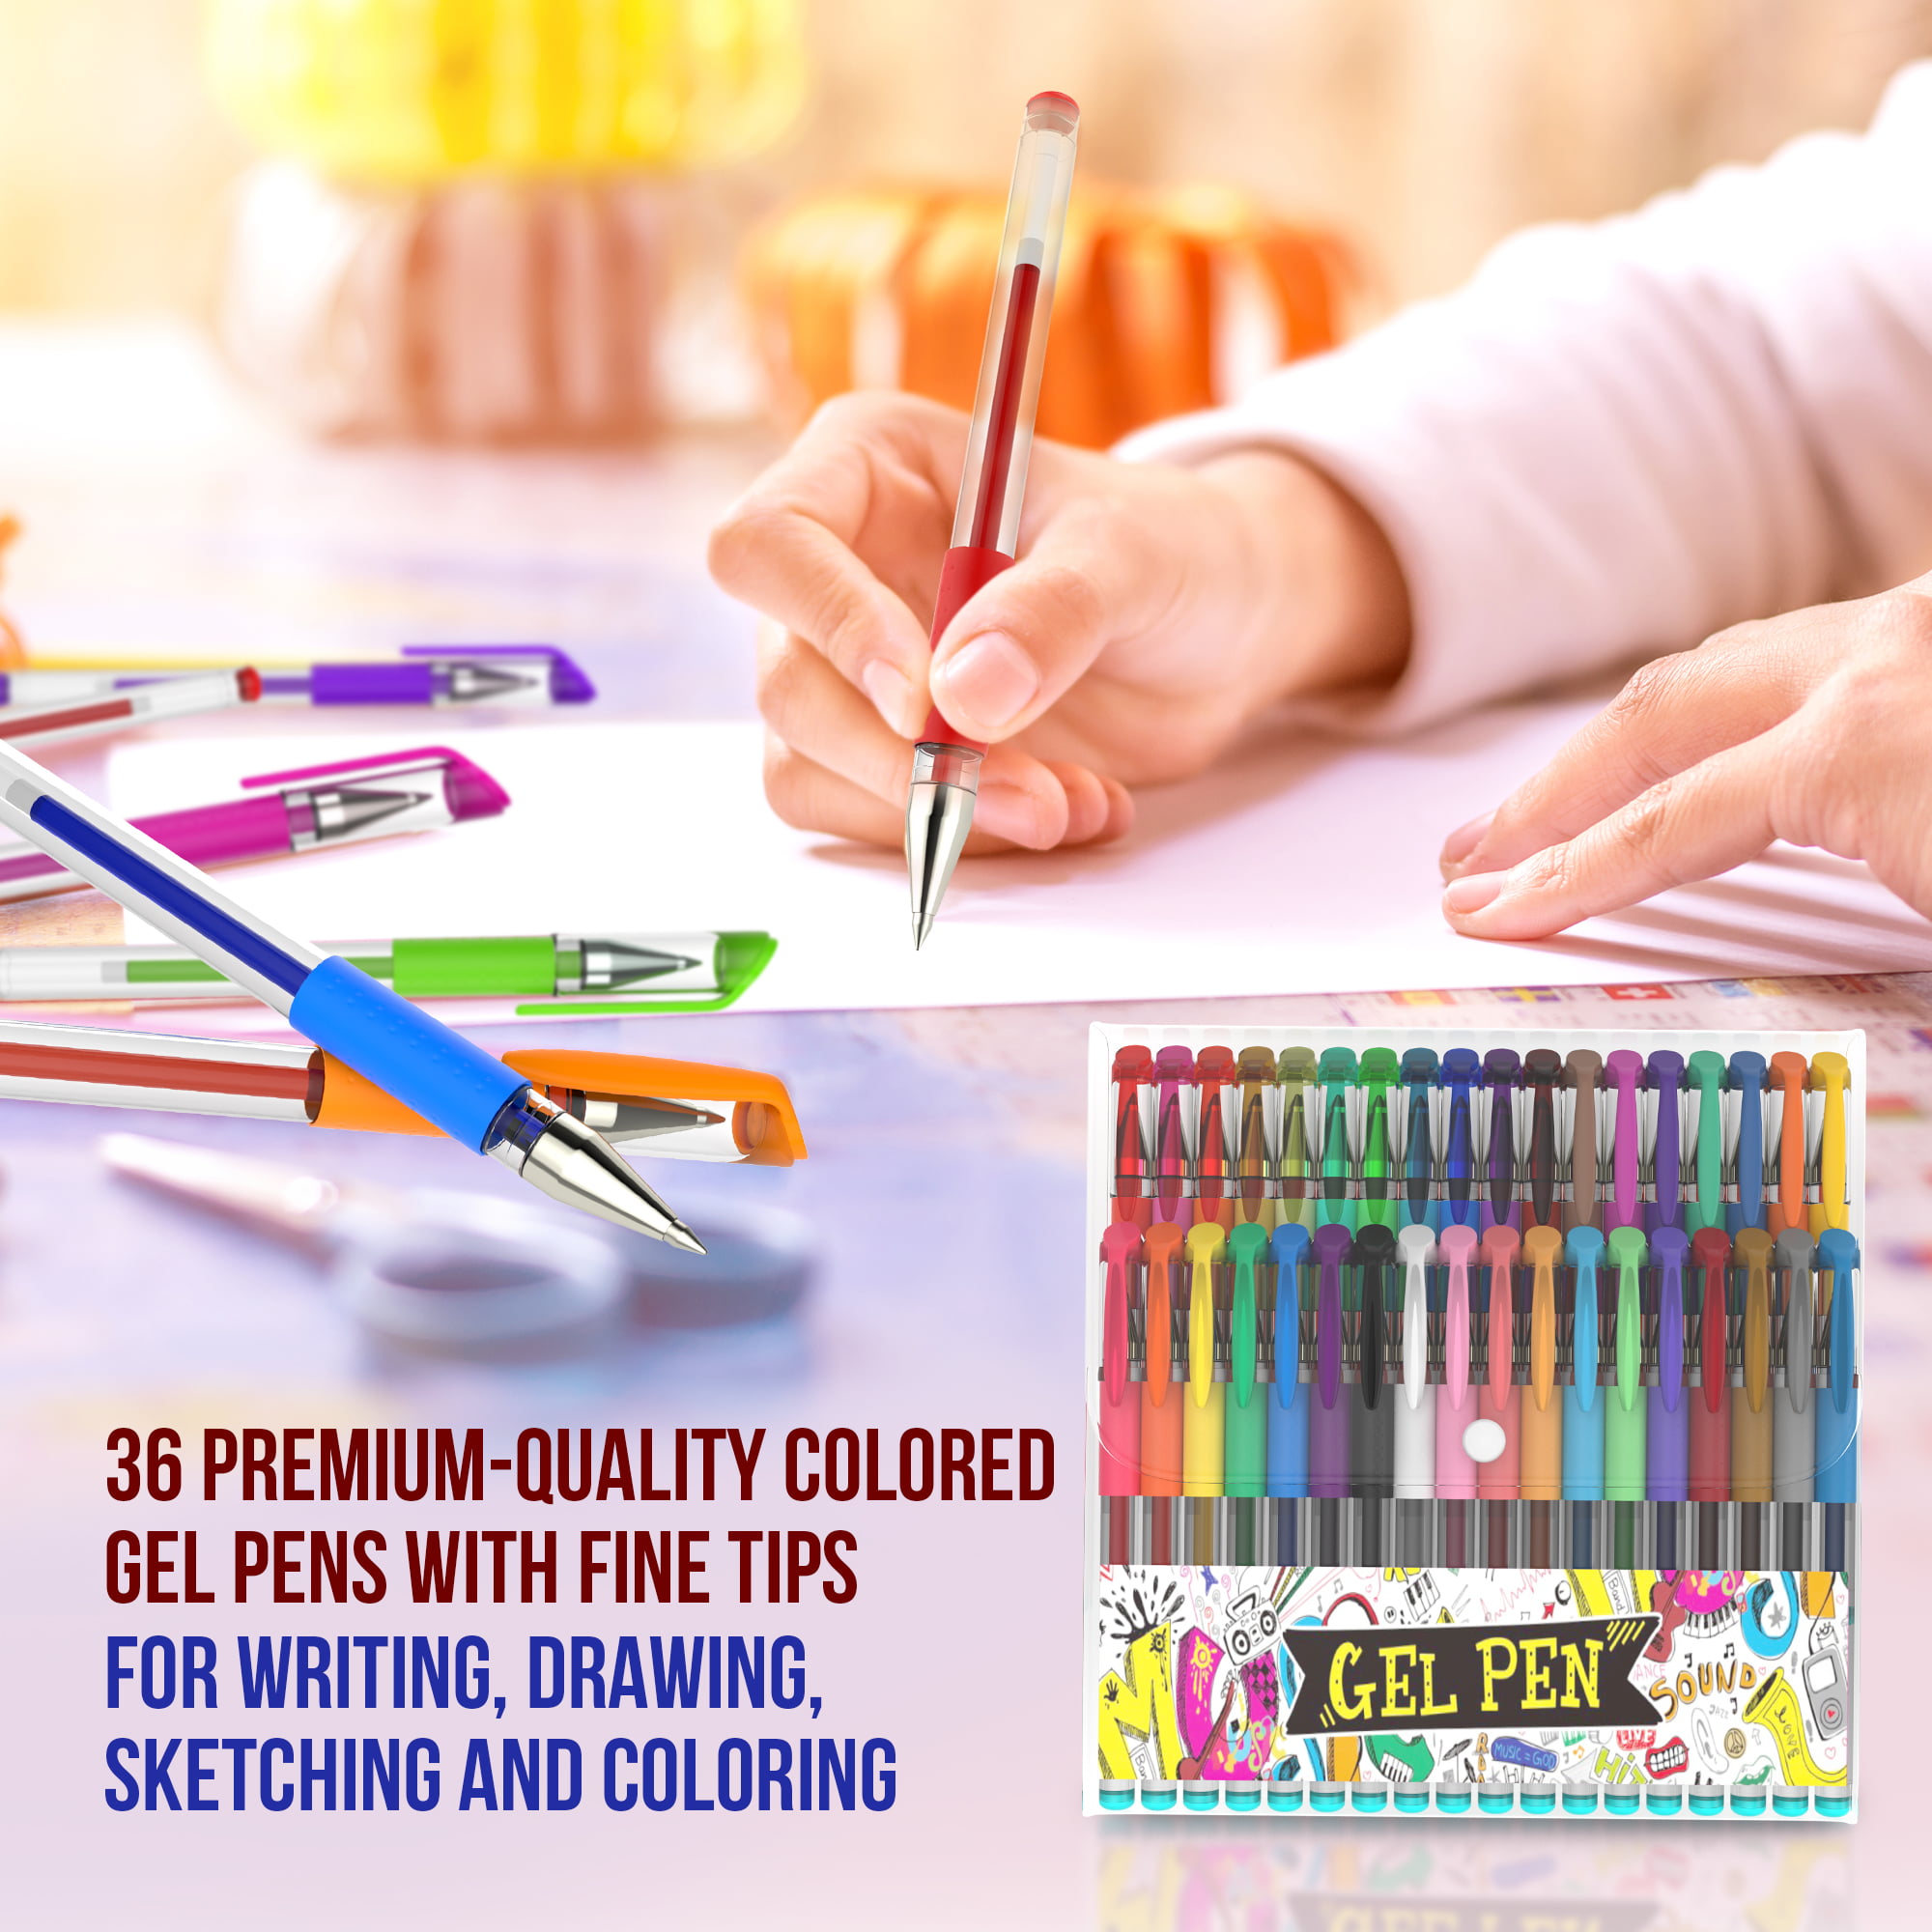 Glitter Gel Pens, Set of 12 Professional Artist Quality Pens, Best Gel Pen  Colors with Comfort Grip, Enhance Your Adult Coloring Book Experience Now!  Acid Free, Perfect Gift Idea!